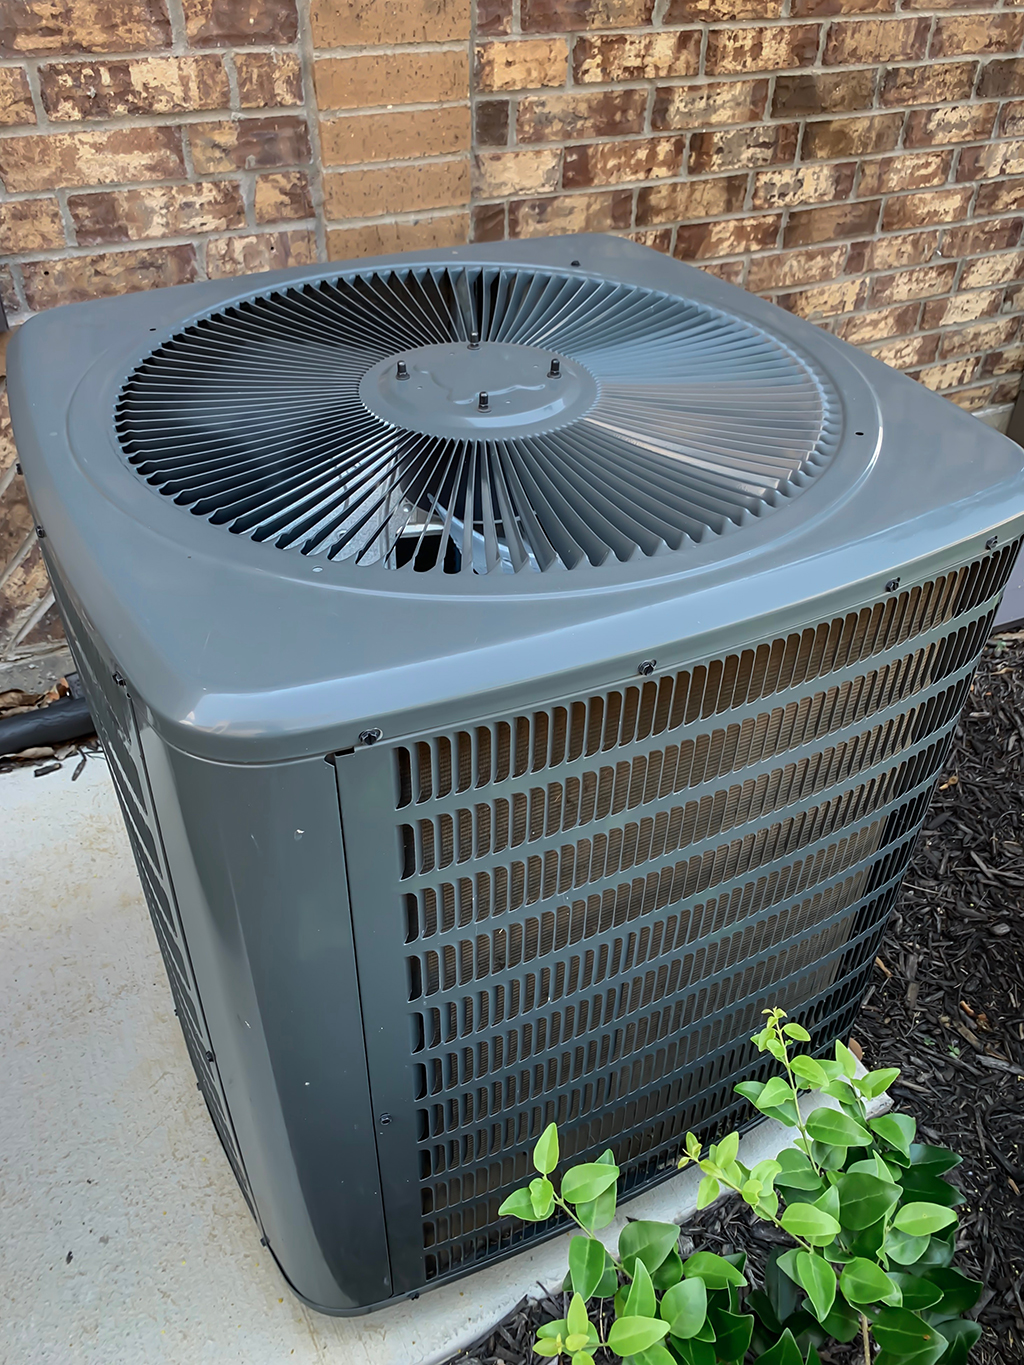 Hallmarks of Effective Heating and AC Repair Services in Richardson, TX